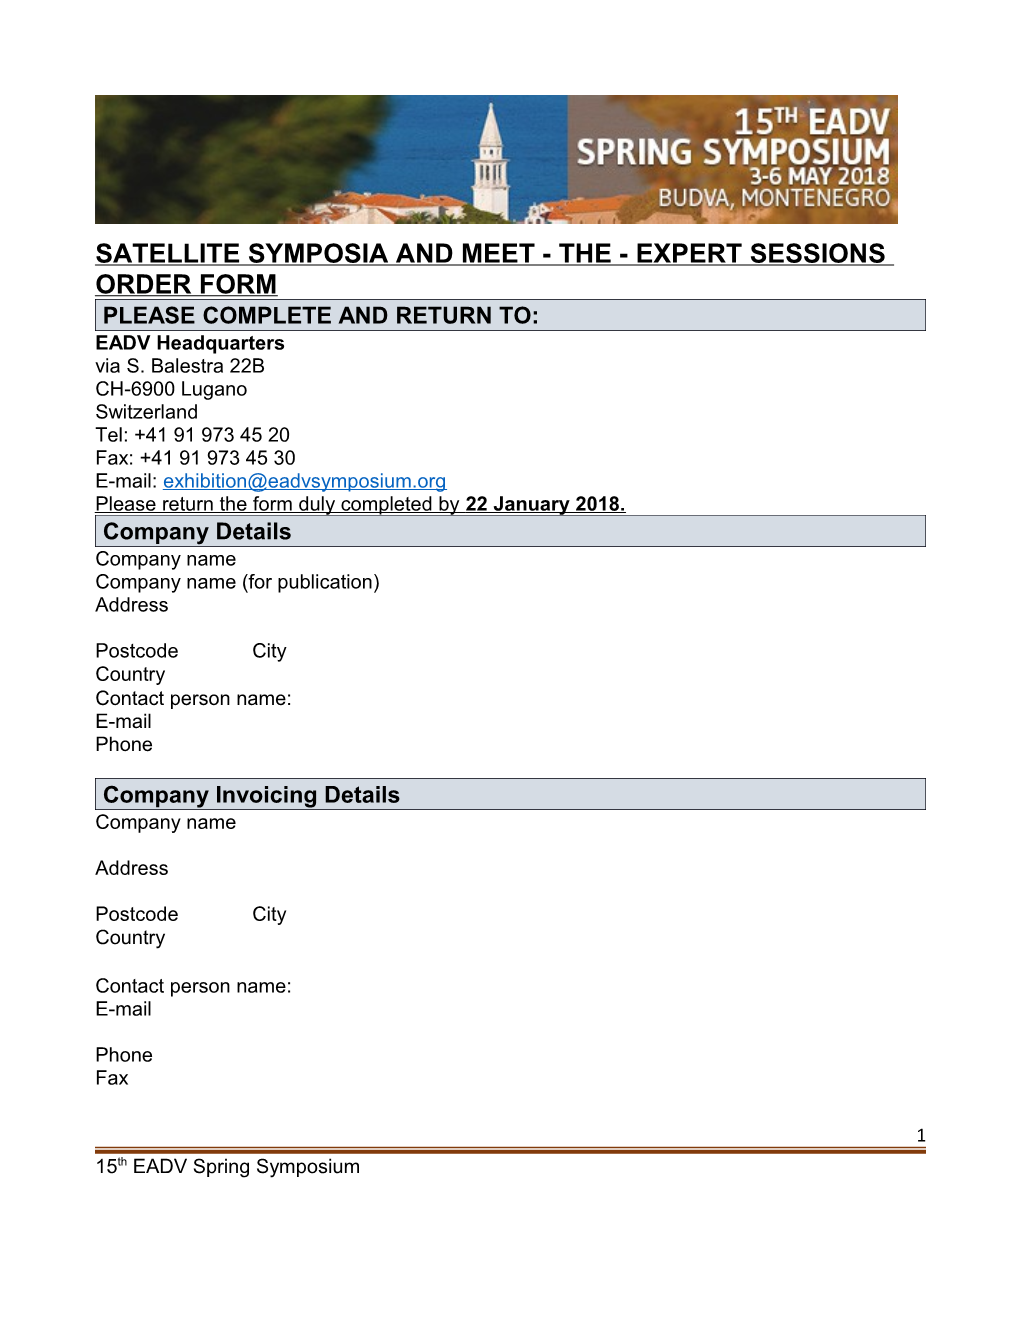 Satellite Symposia and Meet-The-Expert Sessions Order Form